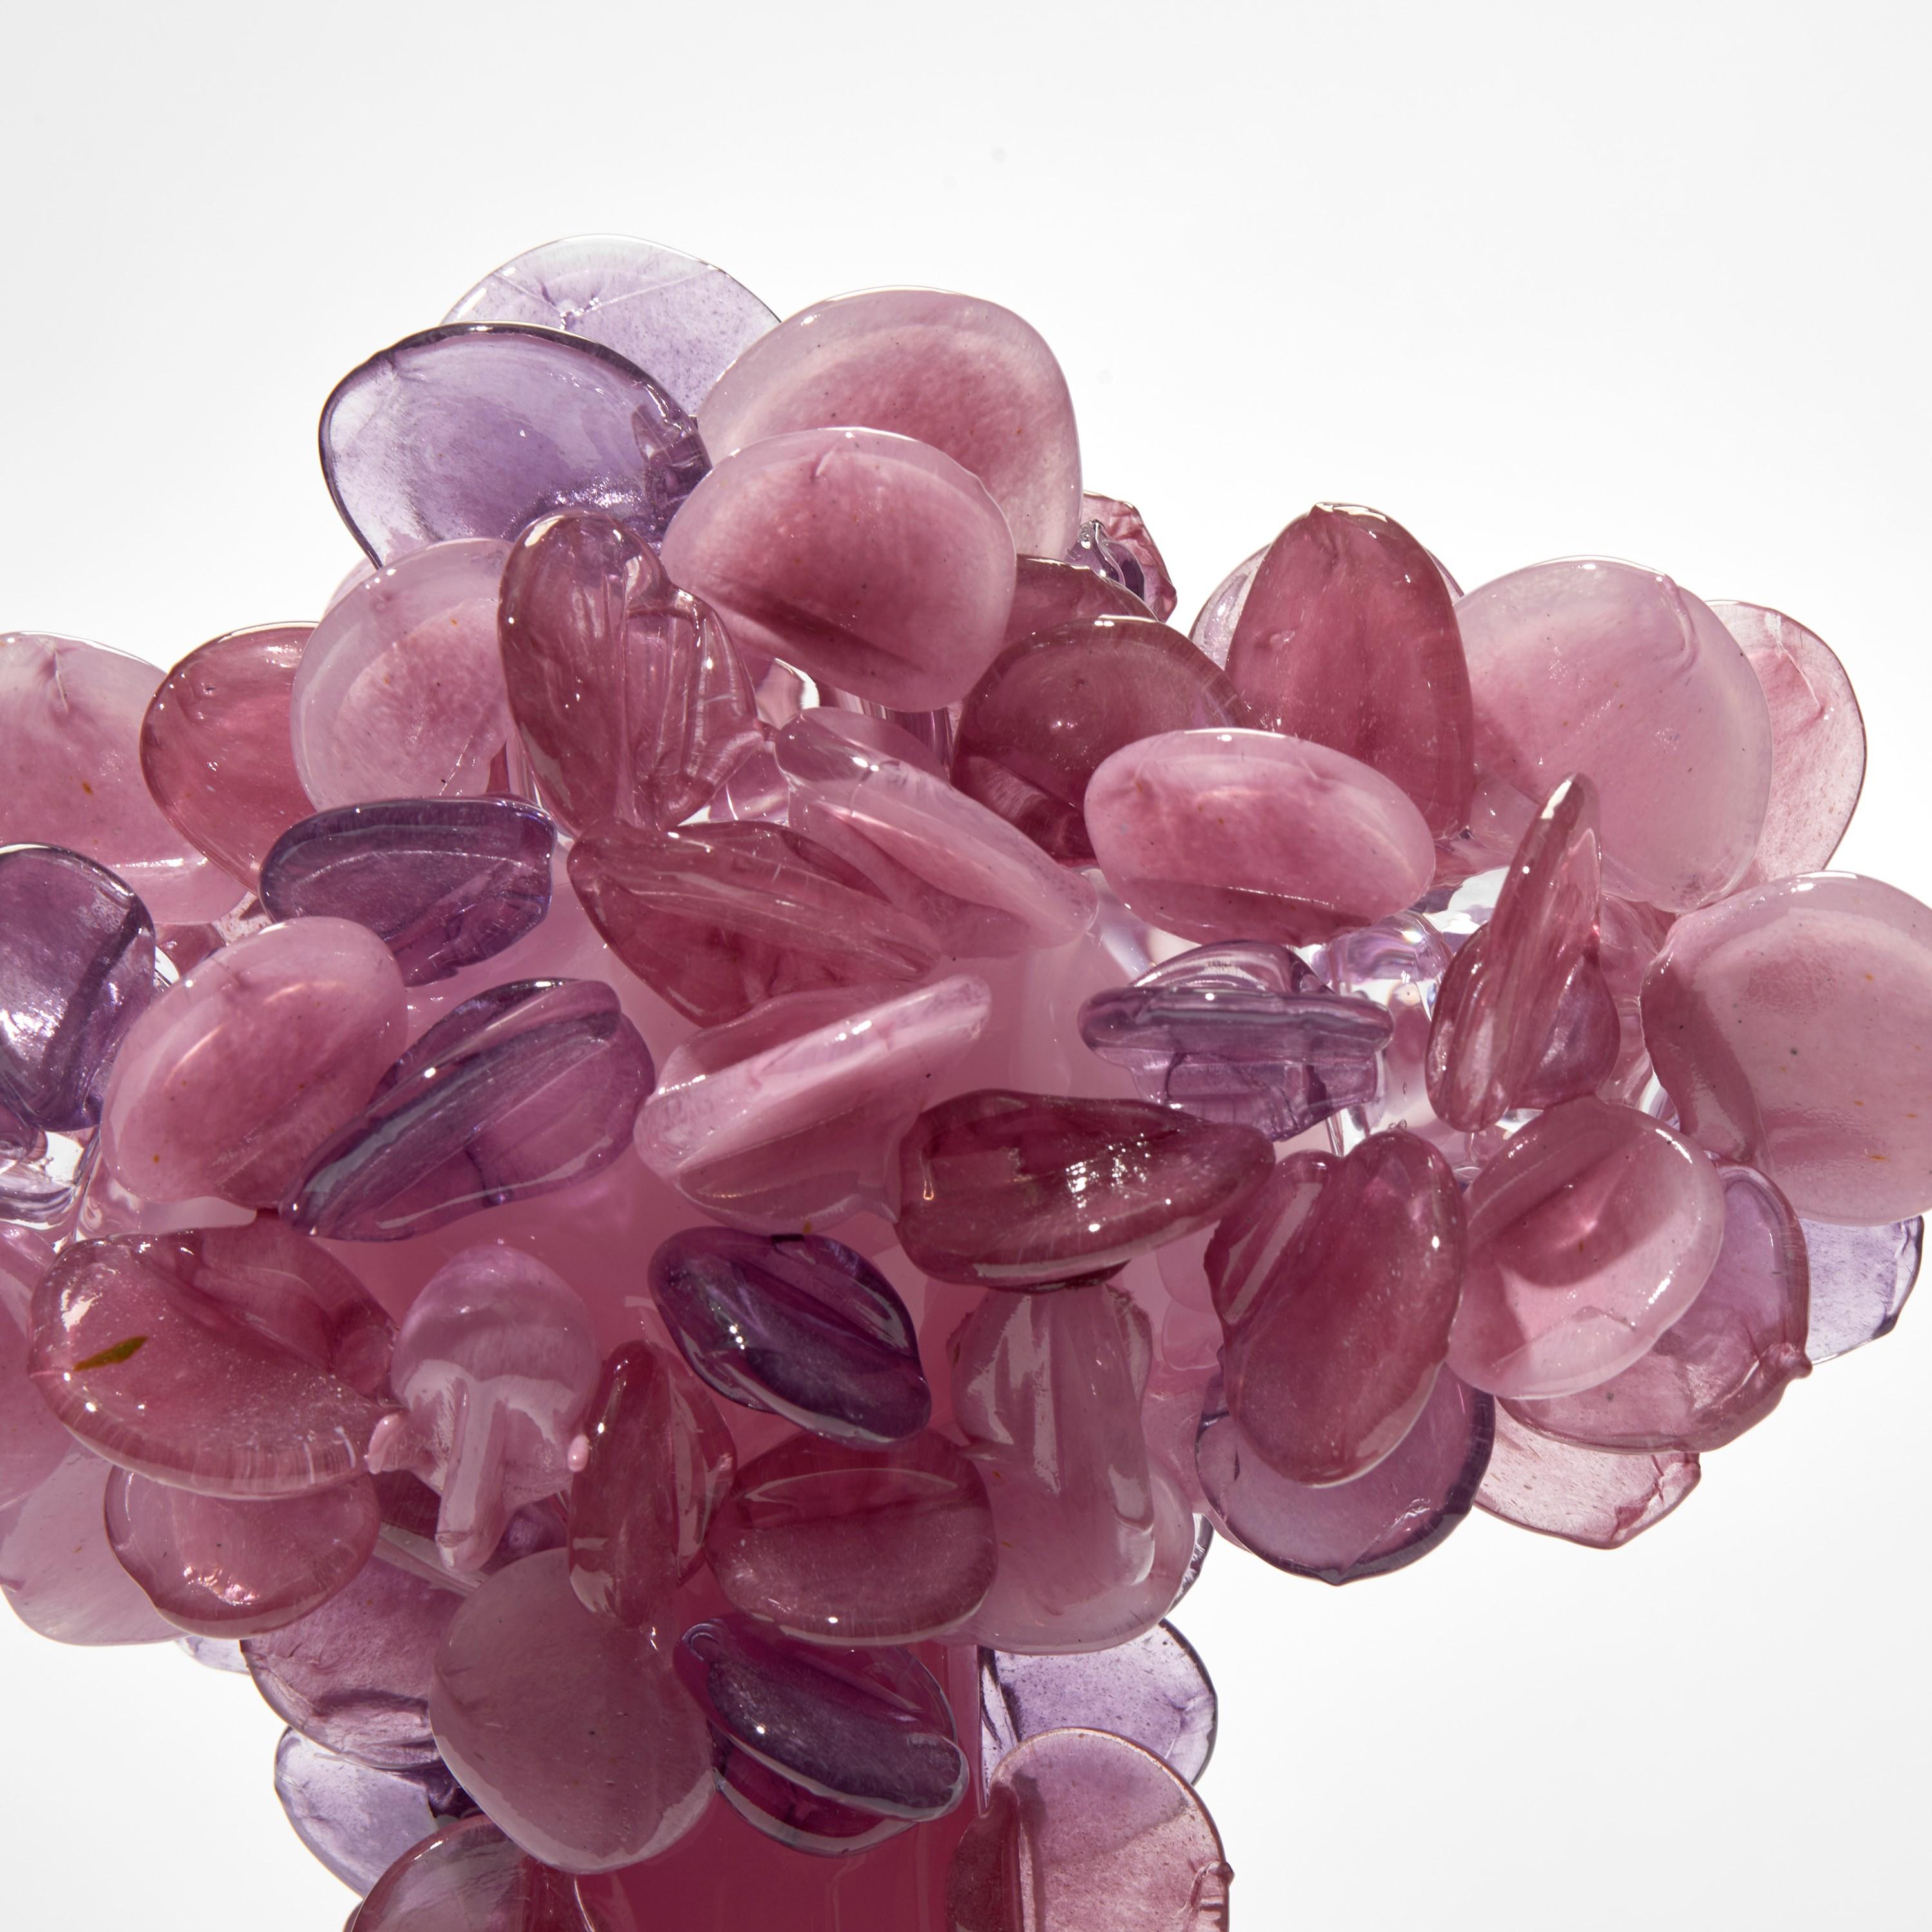 British Enchanted Dawn in Fuchsia, a Unique Pink Glass Tree Sculpture by Louis Thompson